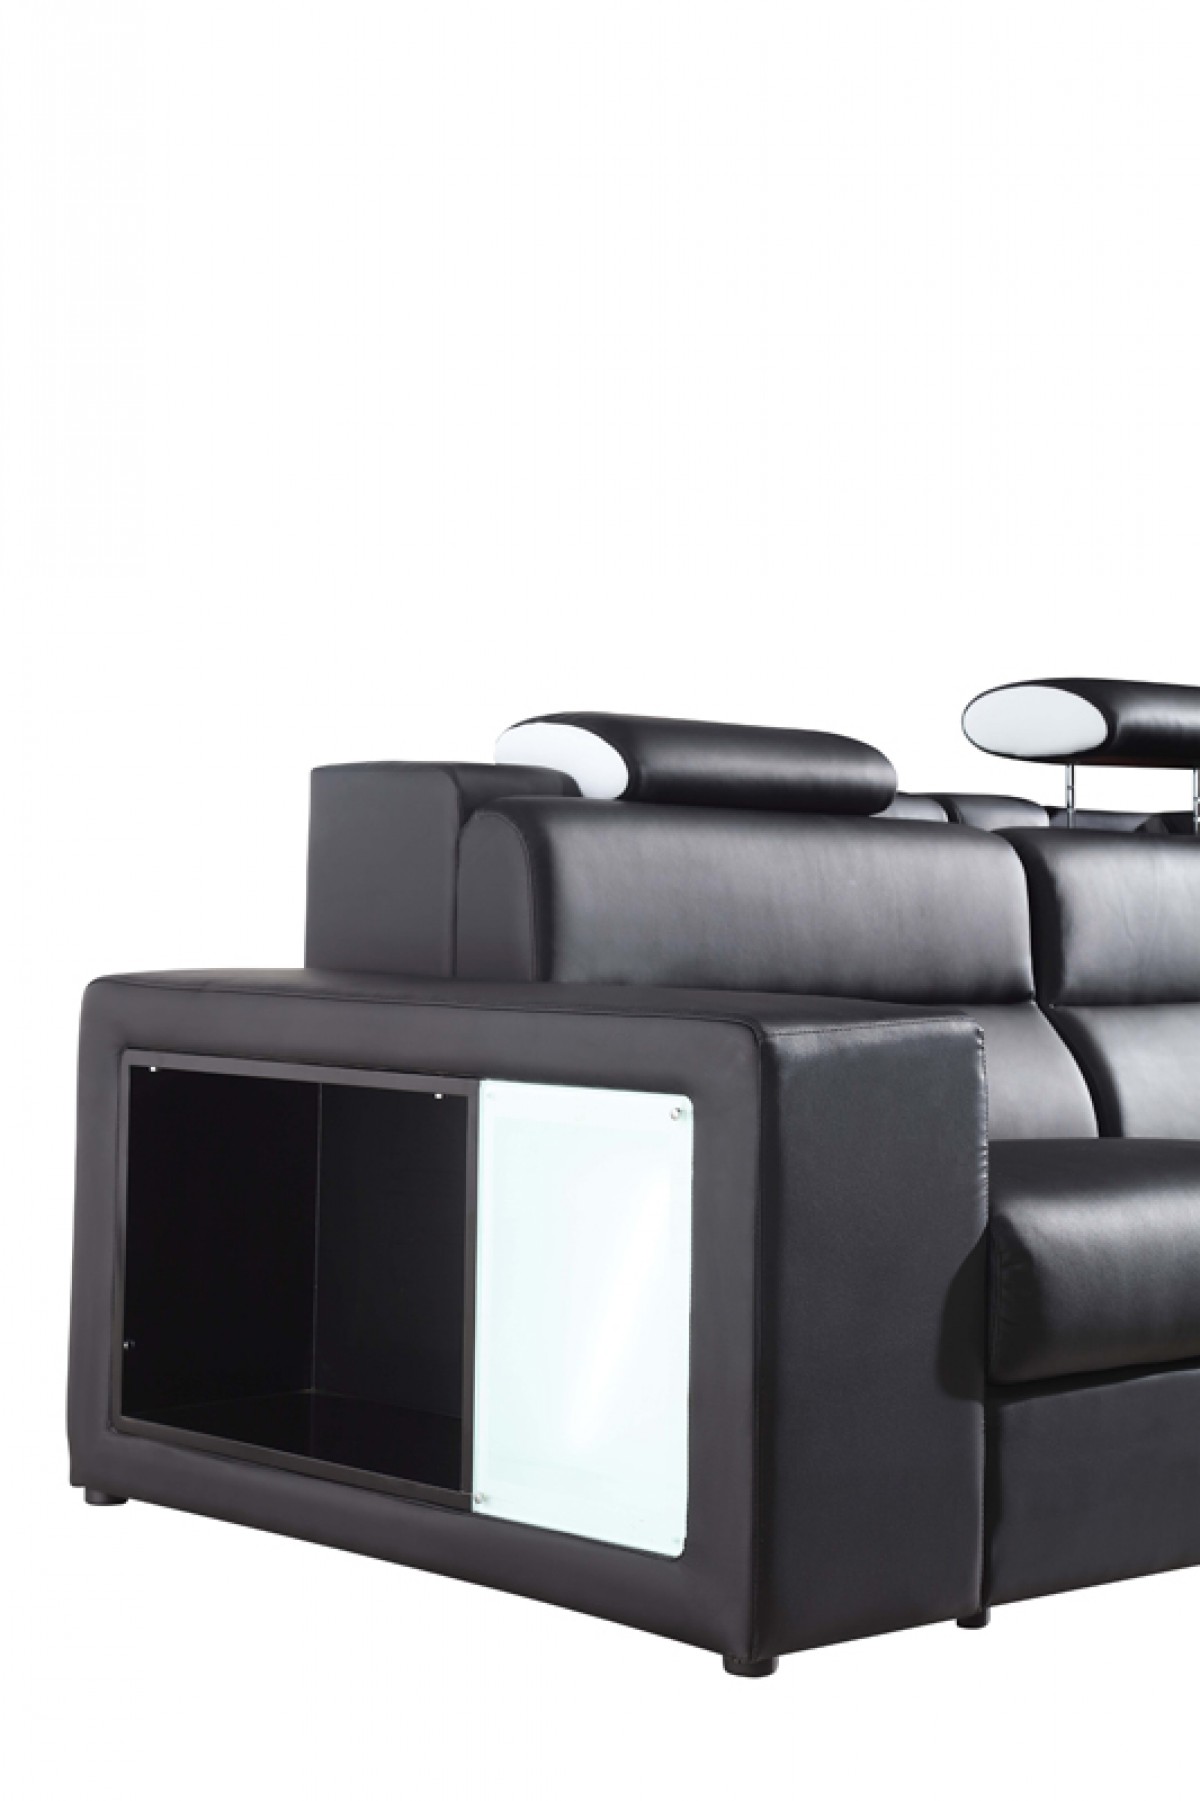 Long Rounded Contemporary Sectional in Black Bonded Leather